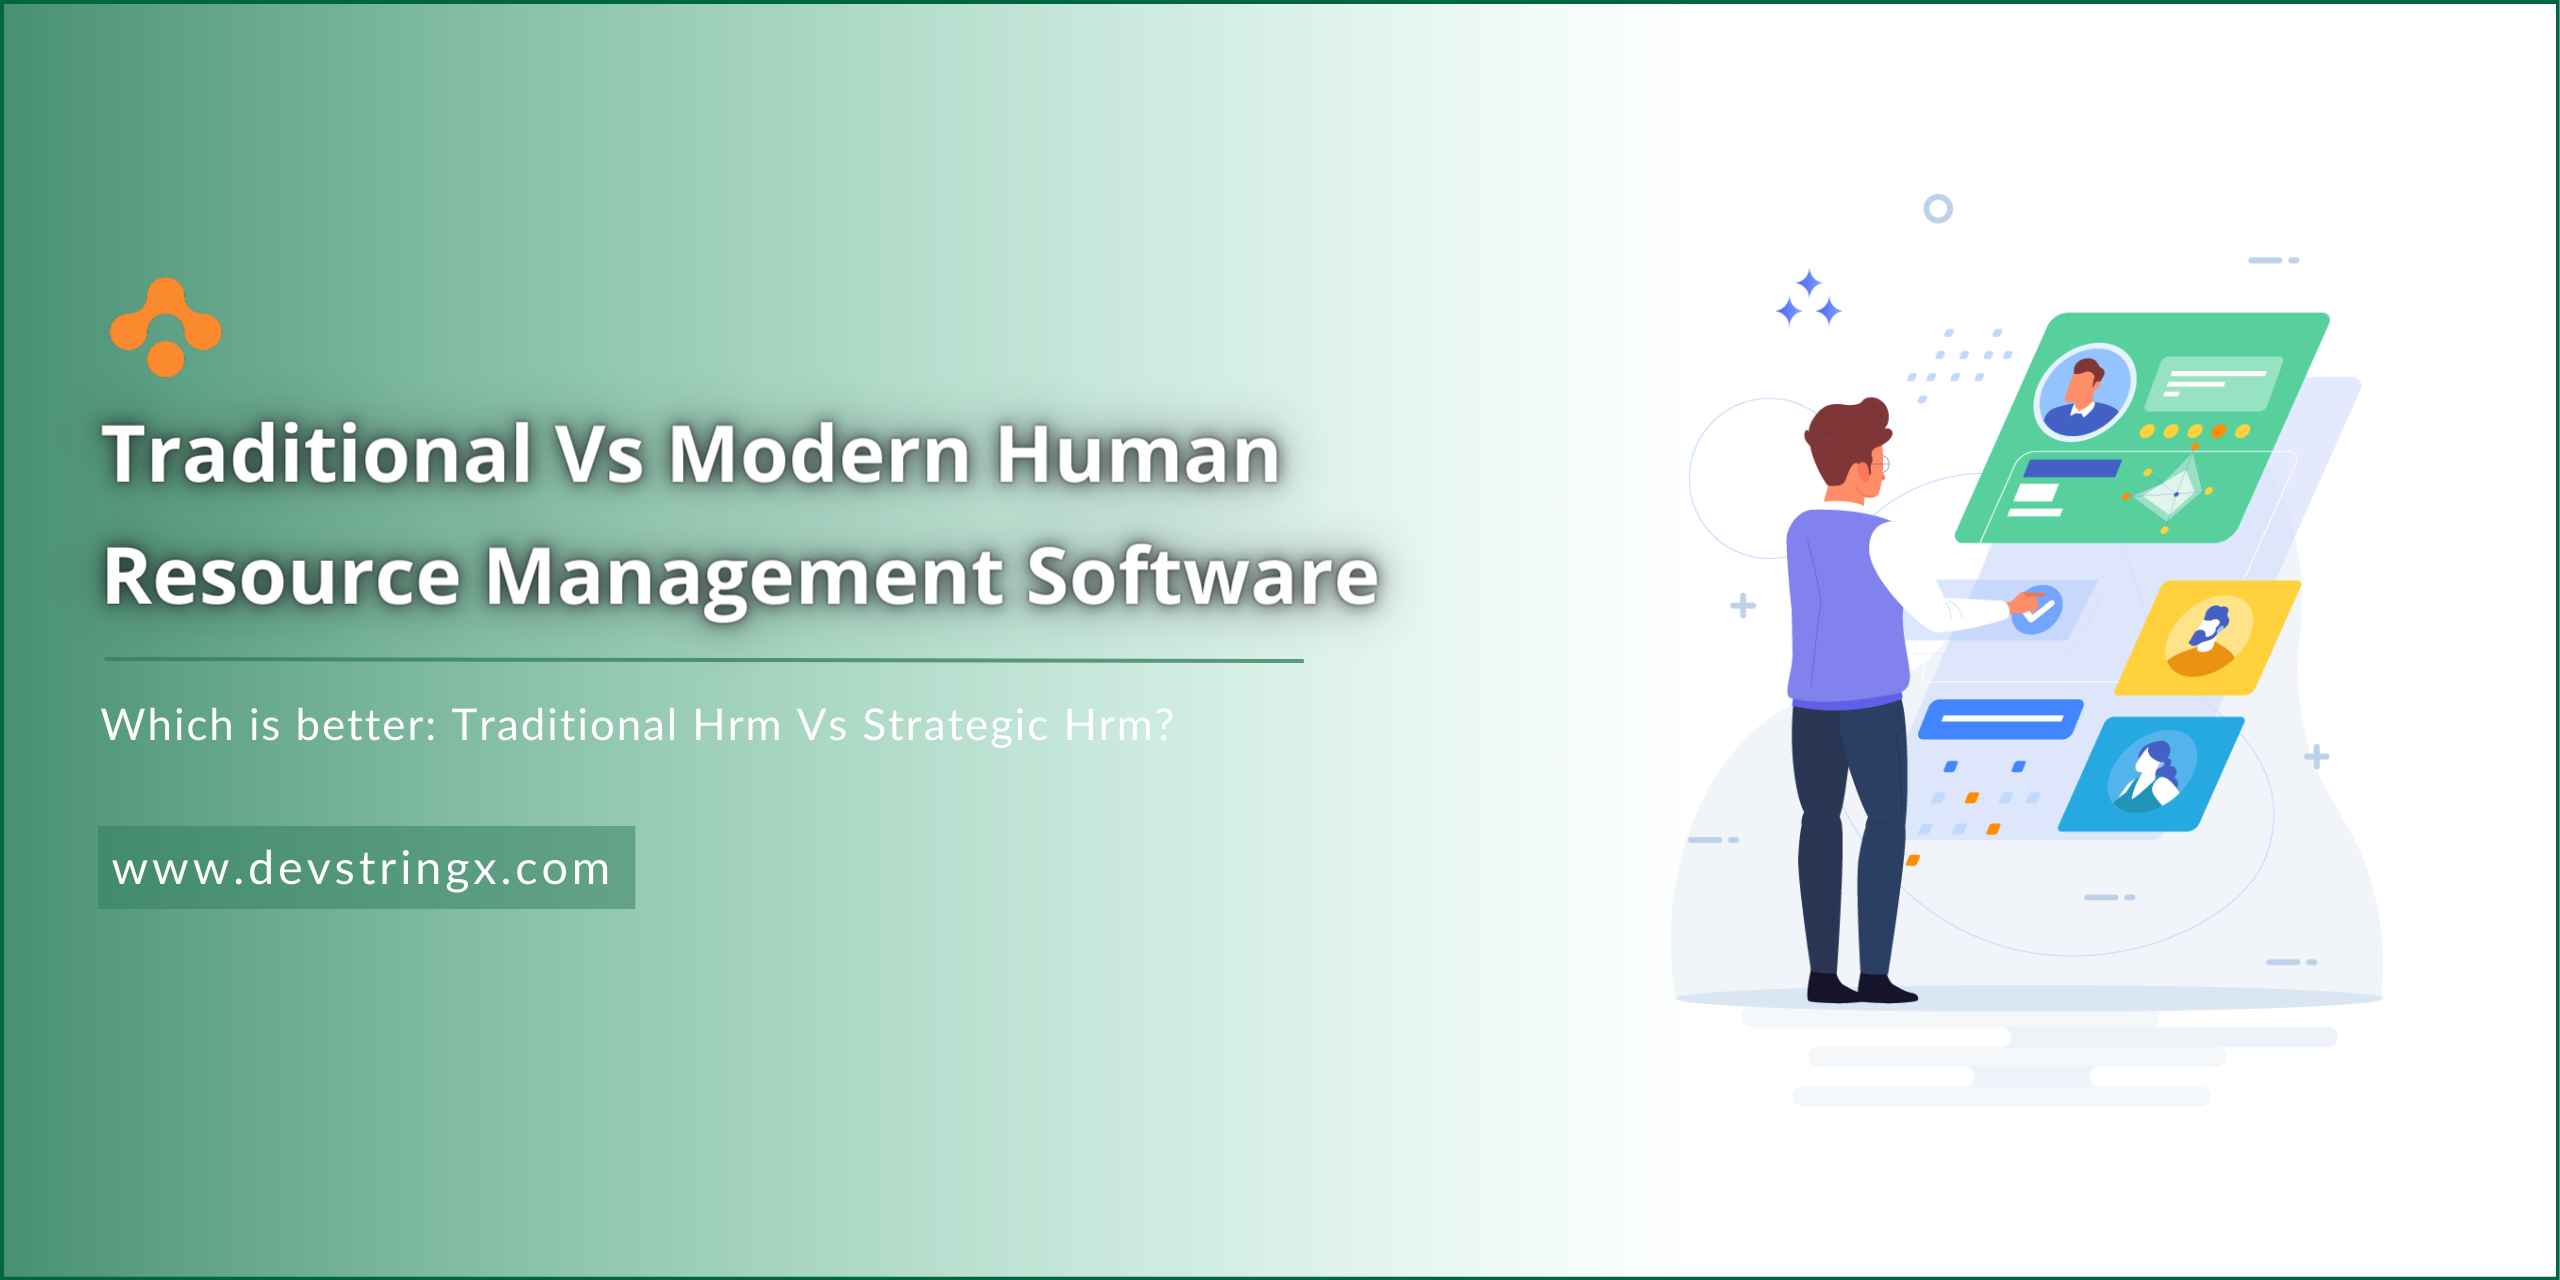 Feature image for Traditional Vs Modern HRM blog